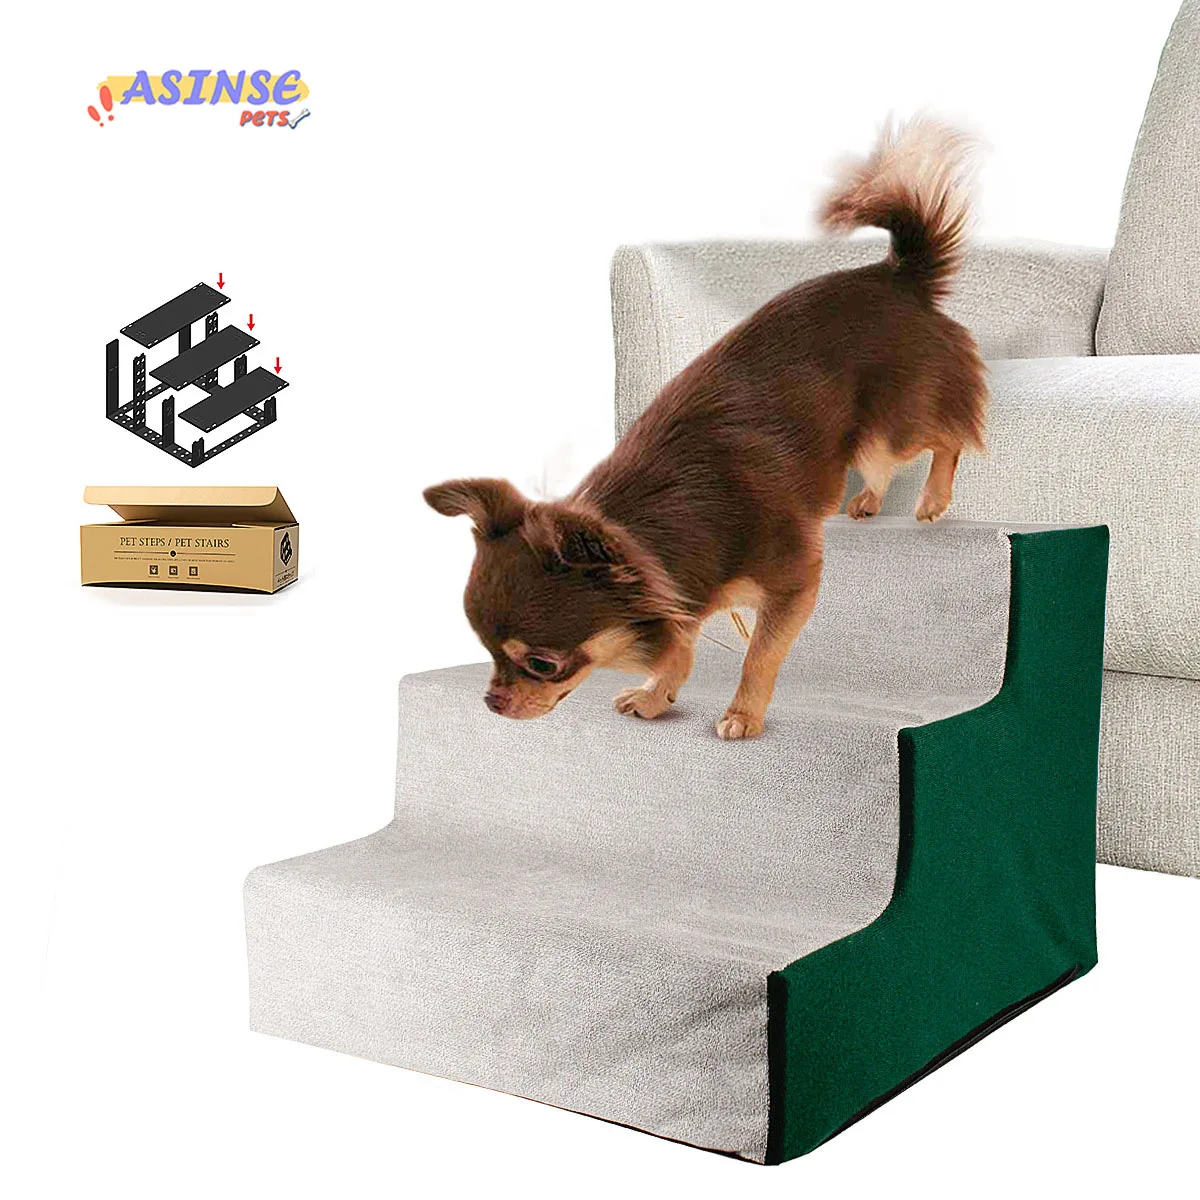 Asinse Dog Climbing Ladder 3 Steps Stairs for Small Dog Cat Assemblable Disassembled Non-slip Platform Ladder Dog Getting in Bed